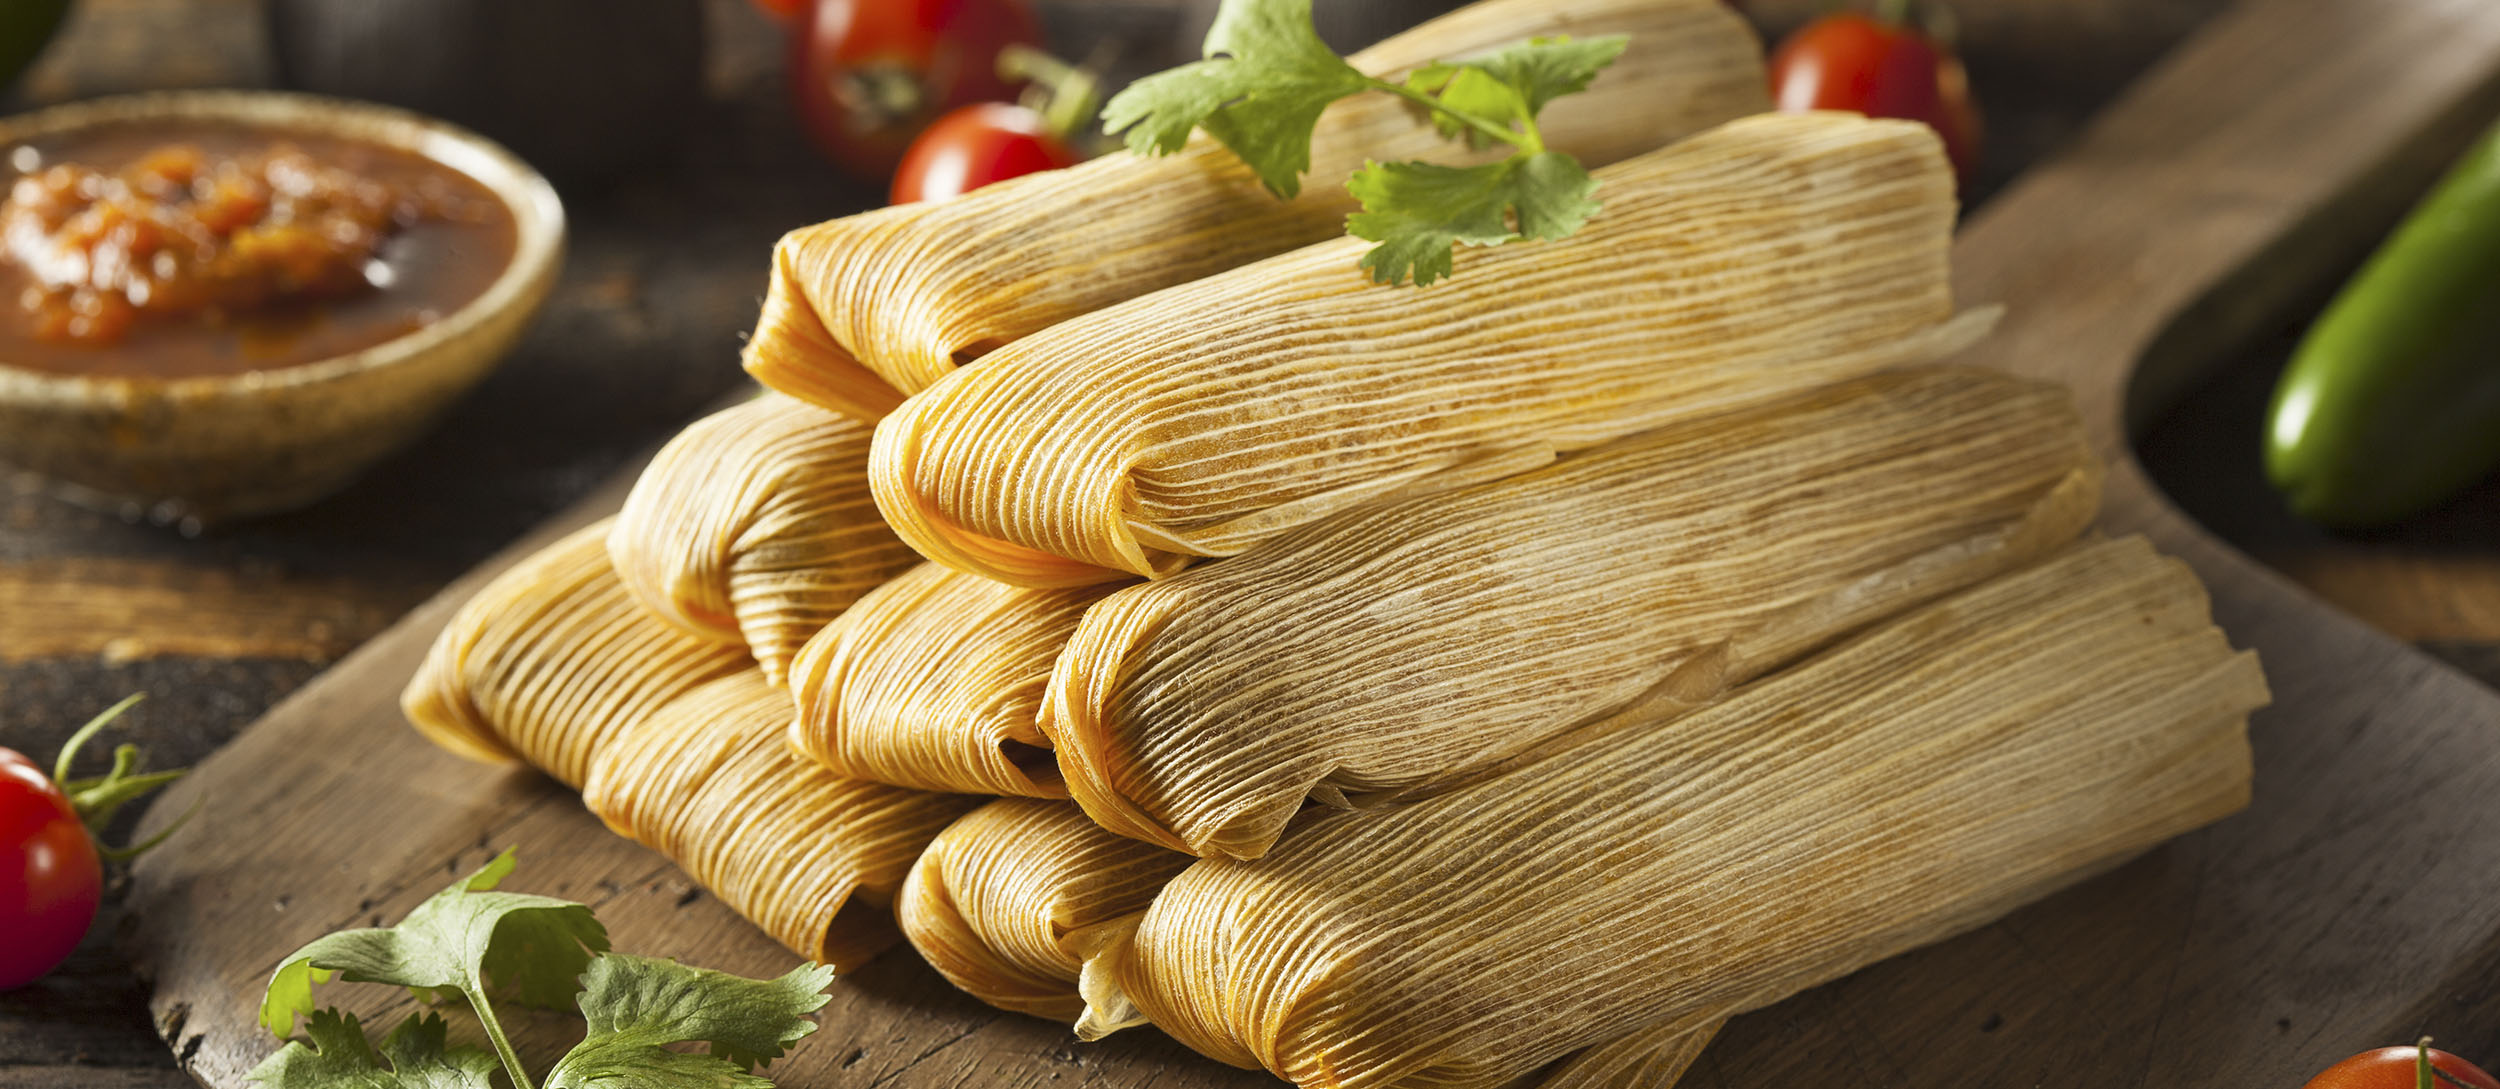 Tamal | Traditional Street Food From Mexico